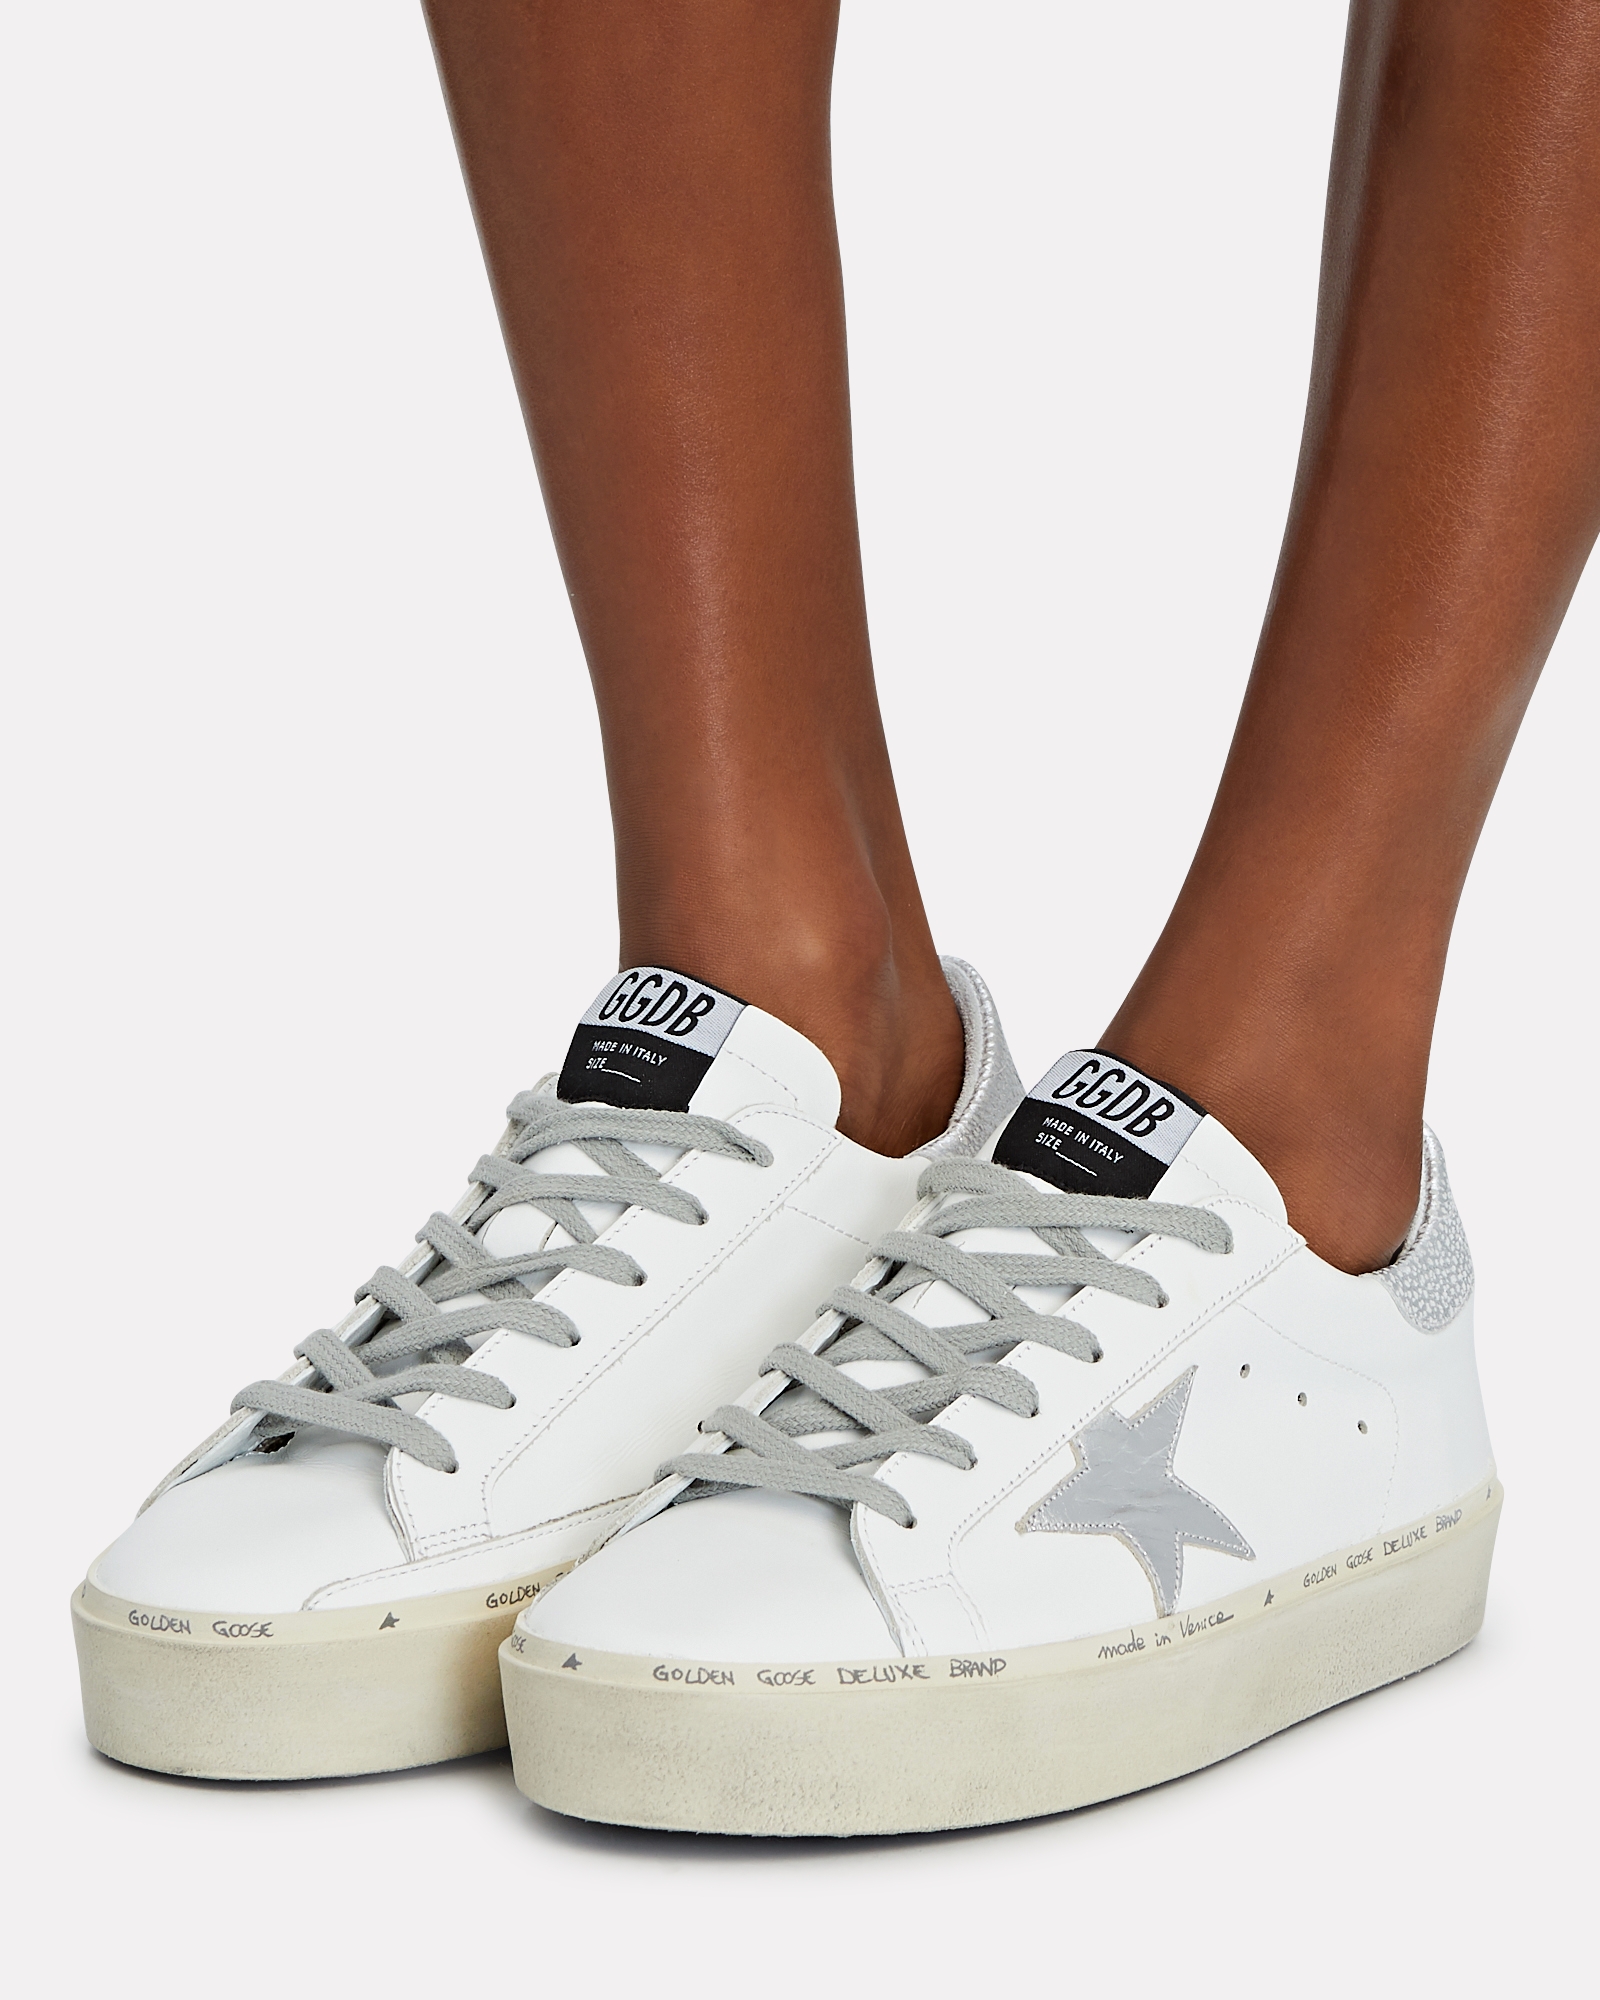 Golden Goose Hi Star Low-Top Leather Sneakers in Silver | INTERMIX®